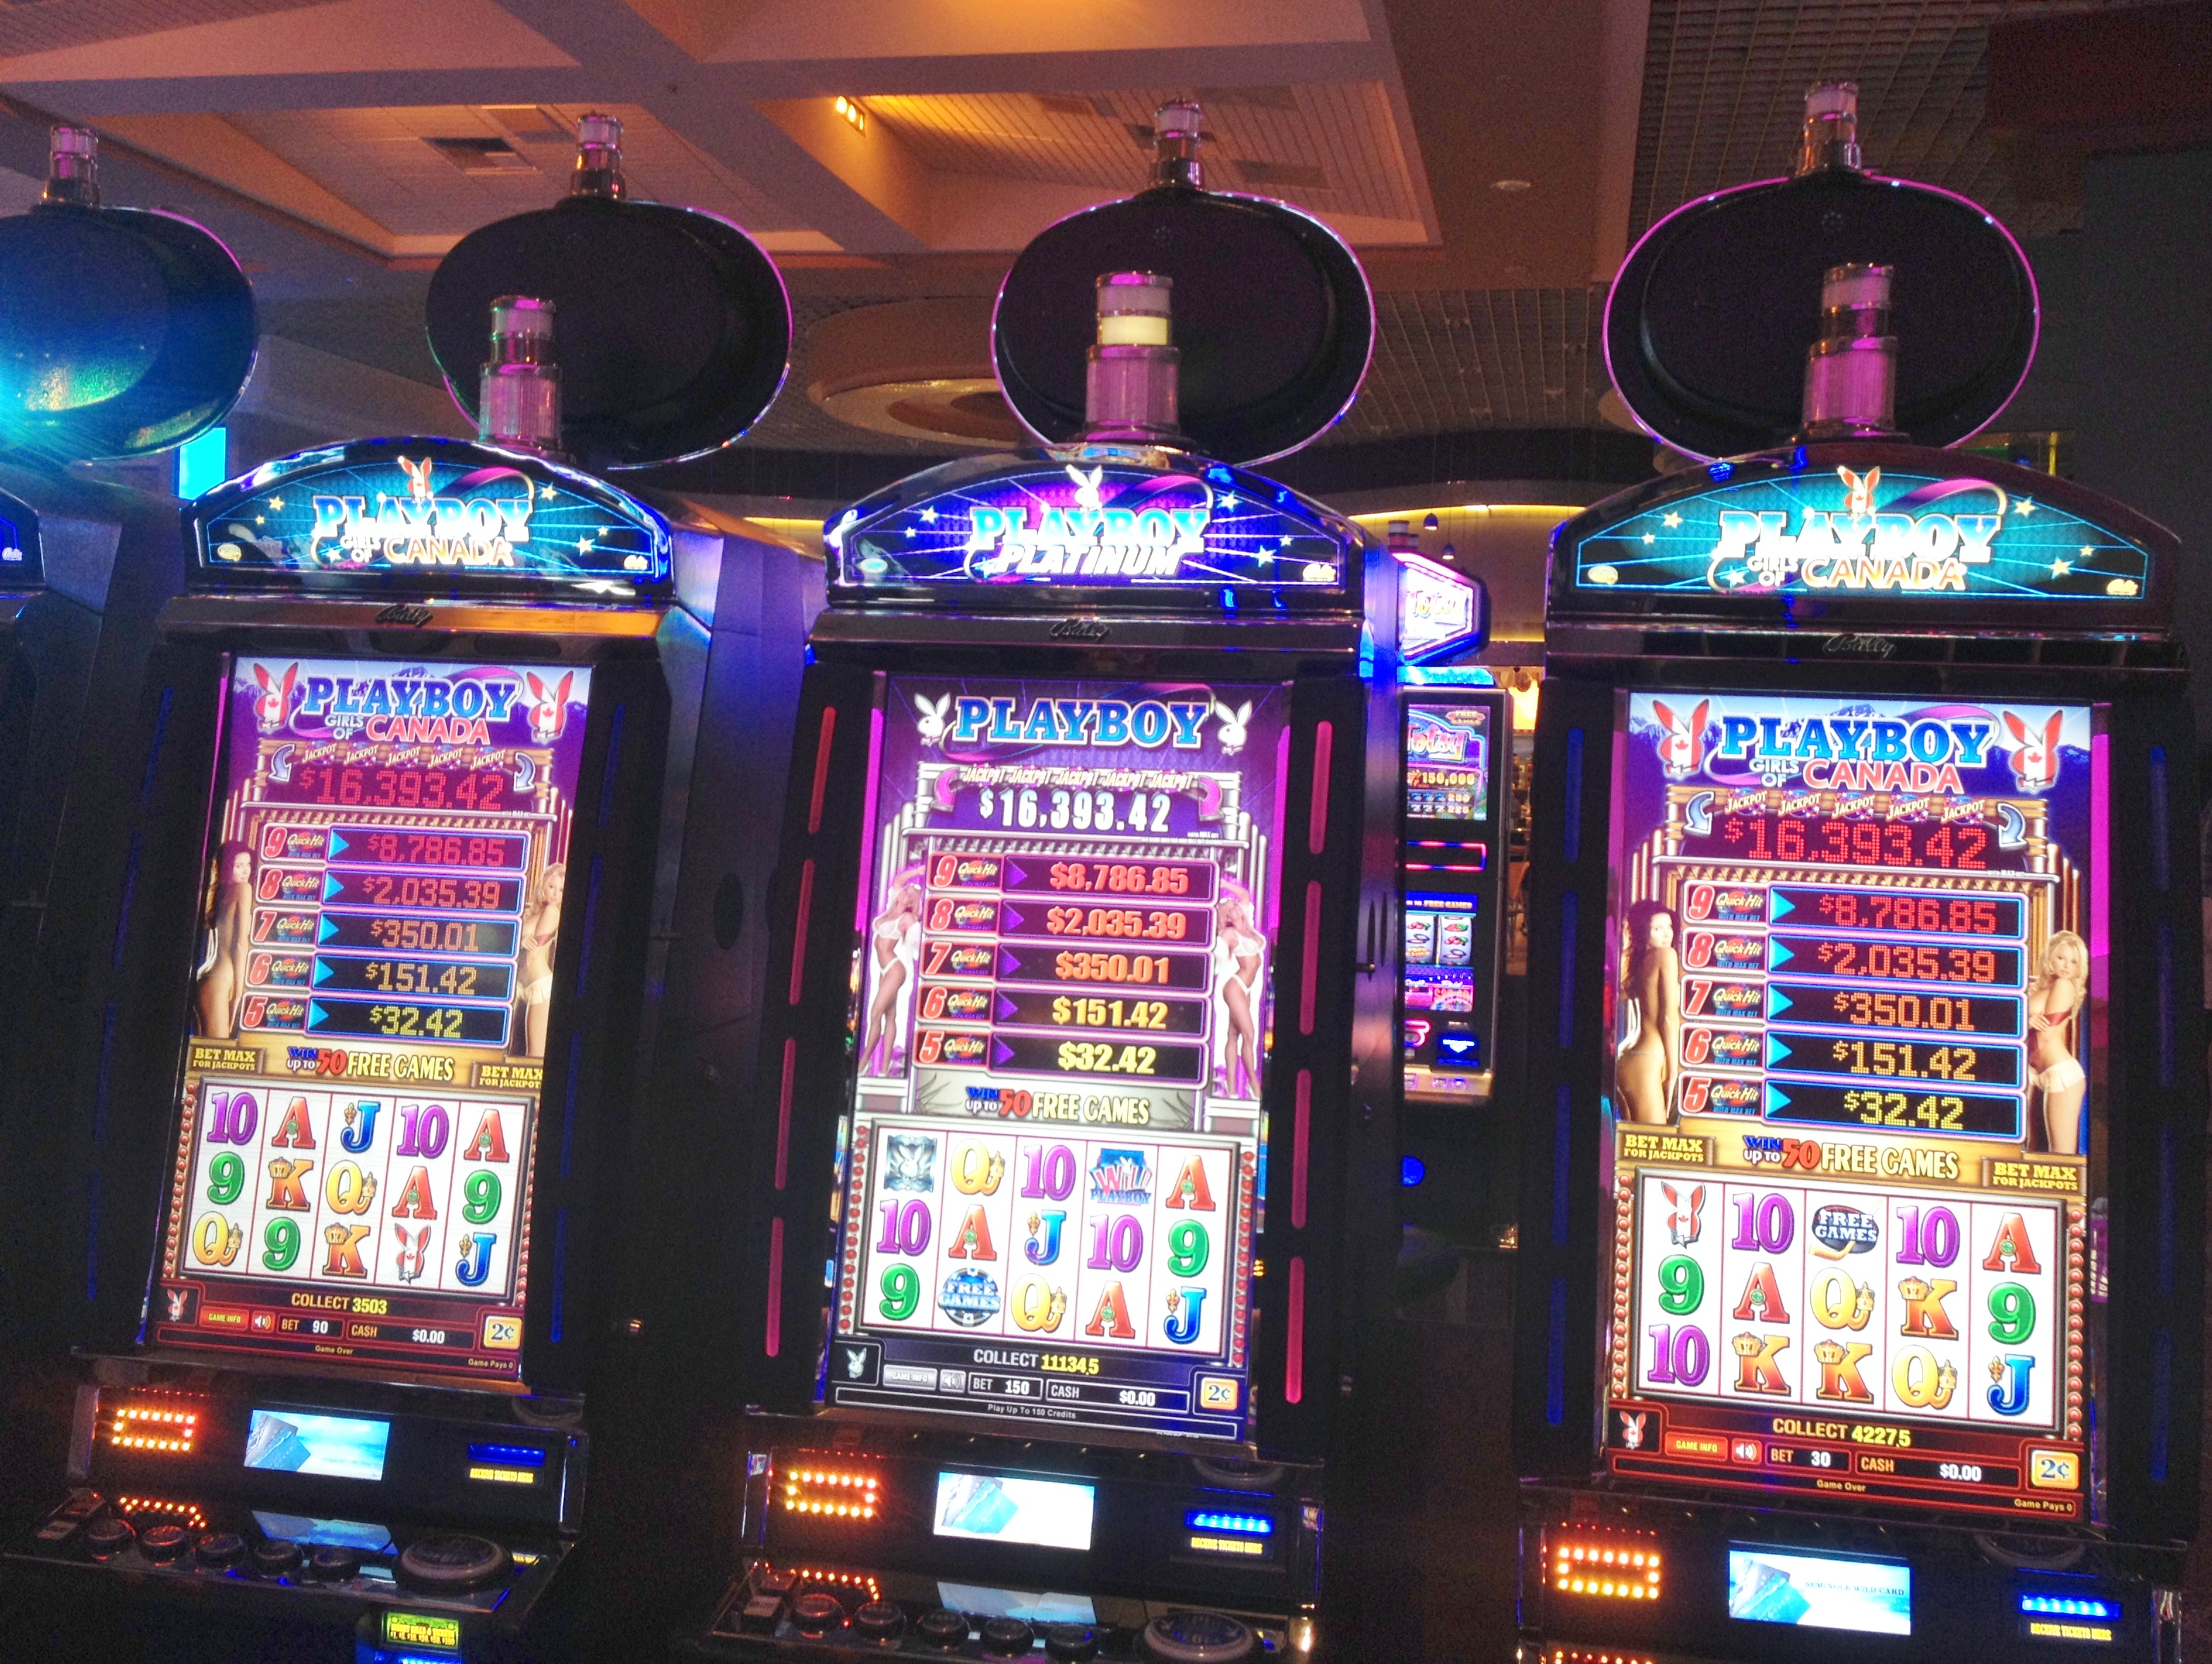 Best slot machines to play at hard rock tampa 2019 Online Exercises vegas slots